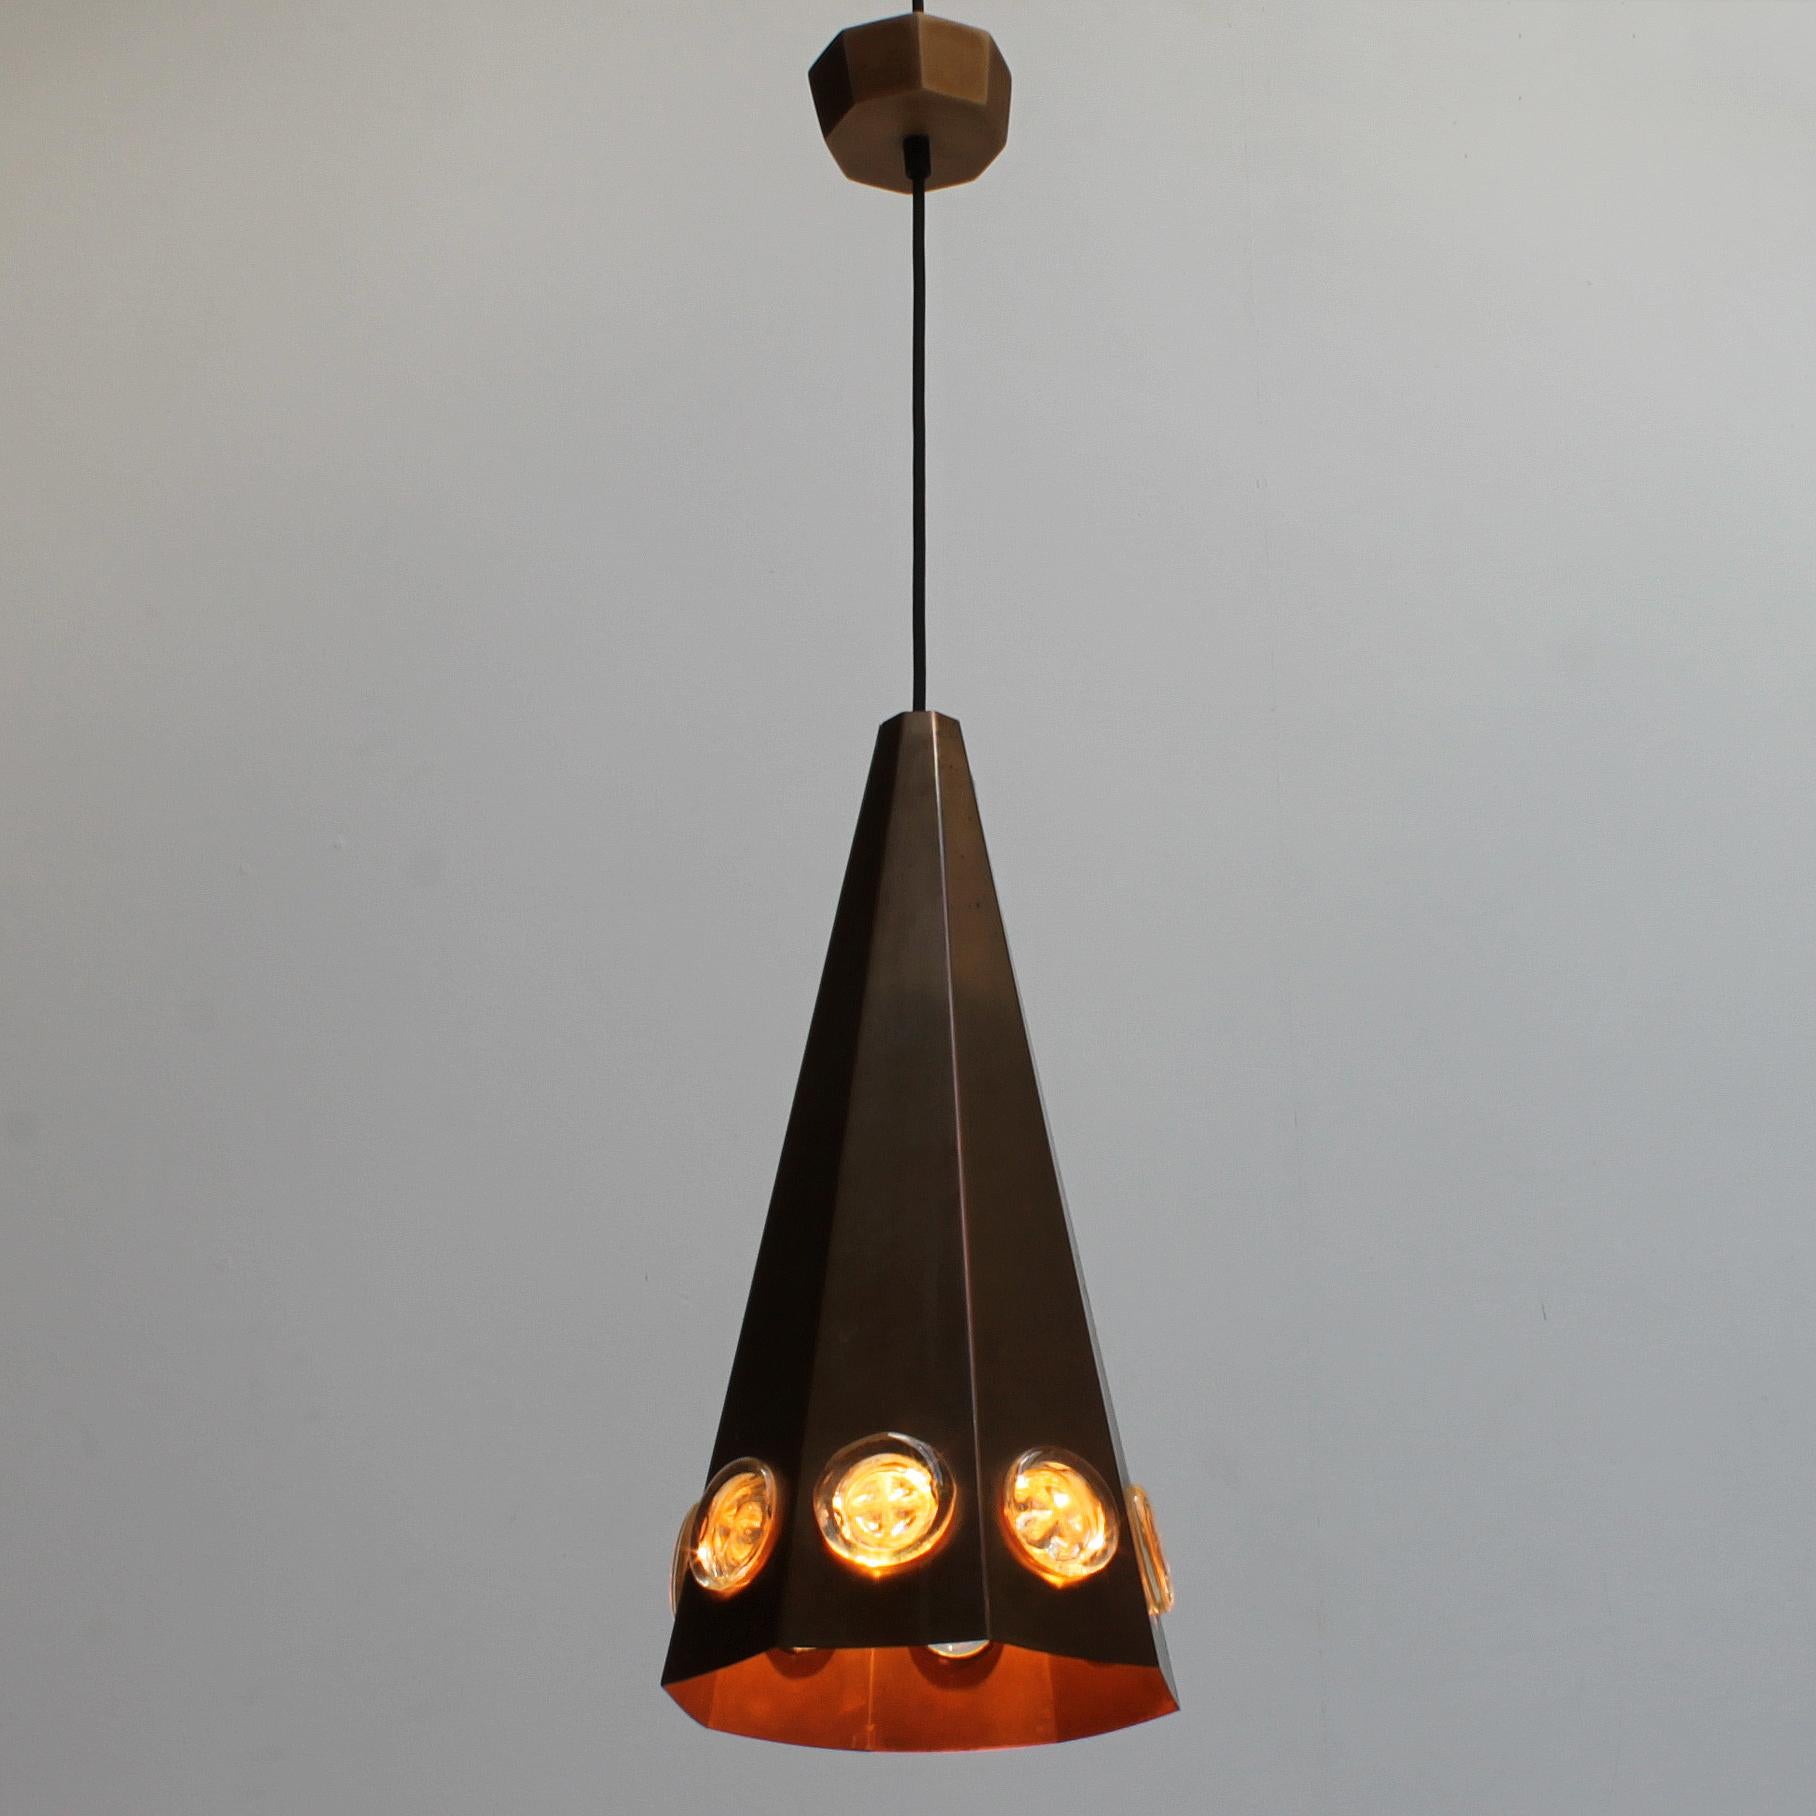 Brutalist Scandinavian pendant by Hans Bergström and Erik Hoglund for Ateljé Lyktan, Sweden. Conical shape in patinated copper and glass medallions. 
Dimensions fixture: height 18.1 inches (46 cm), diameter 8.7 inches (22 cm). From ceiling till